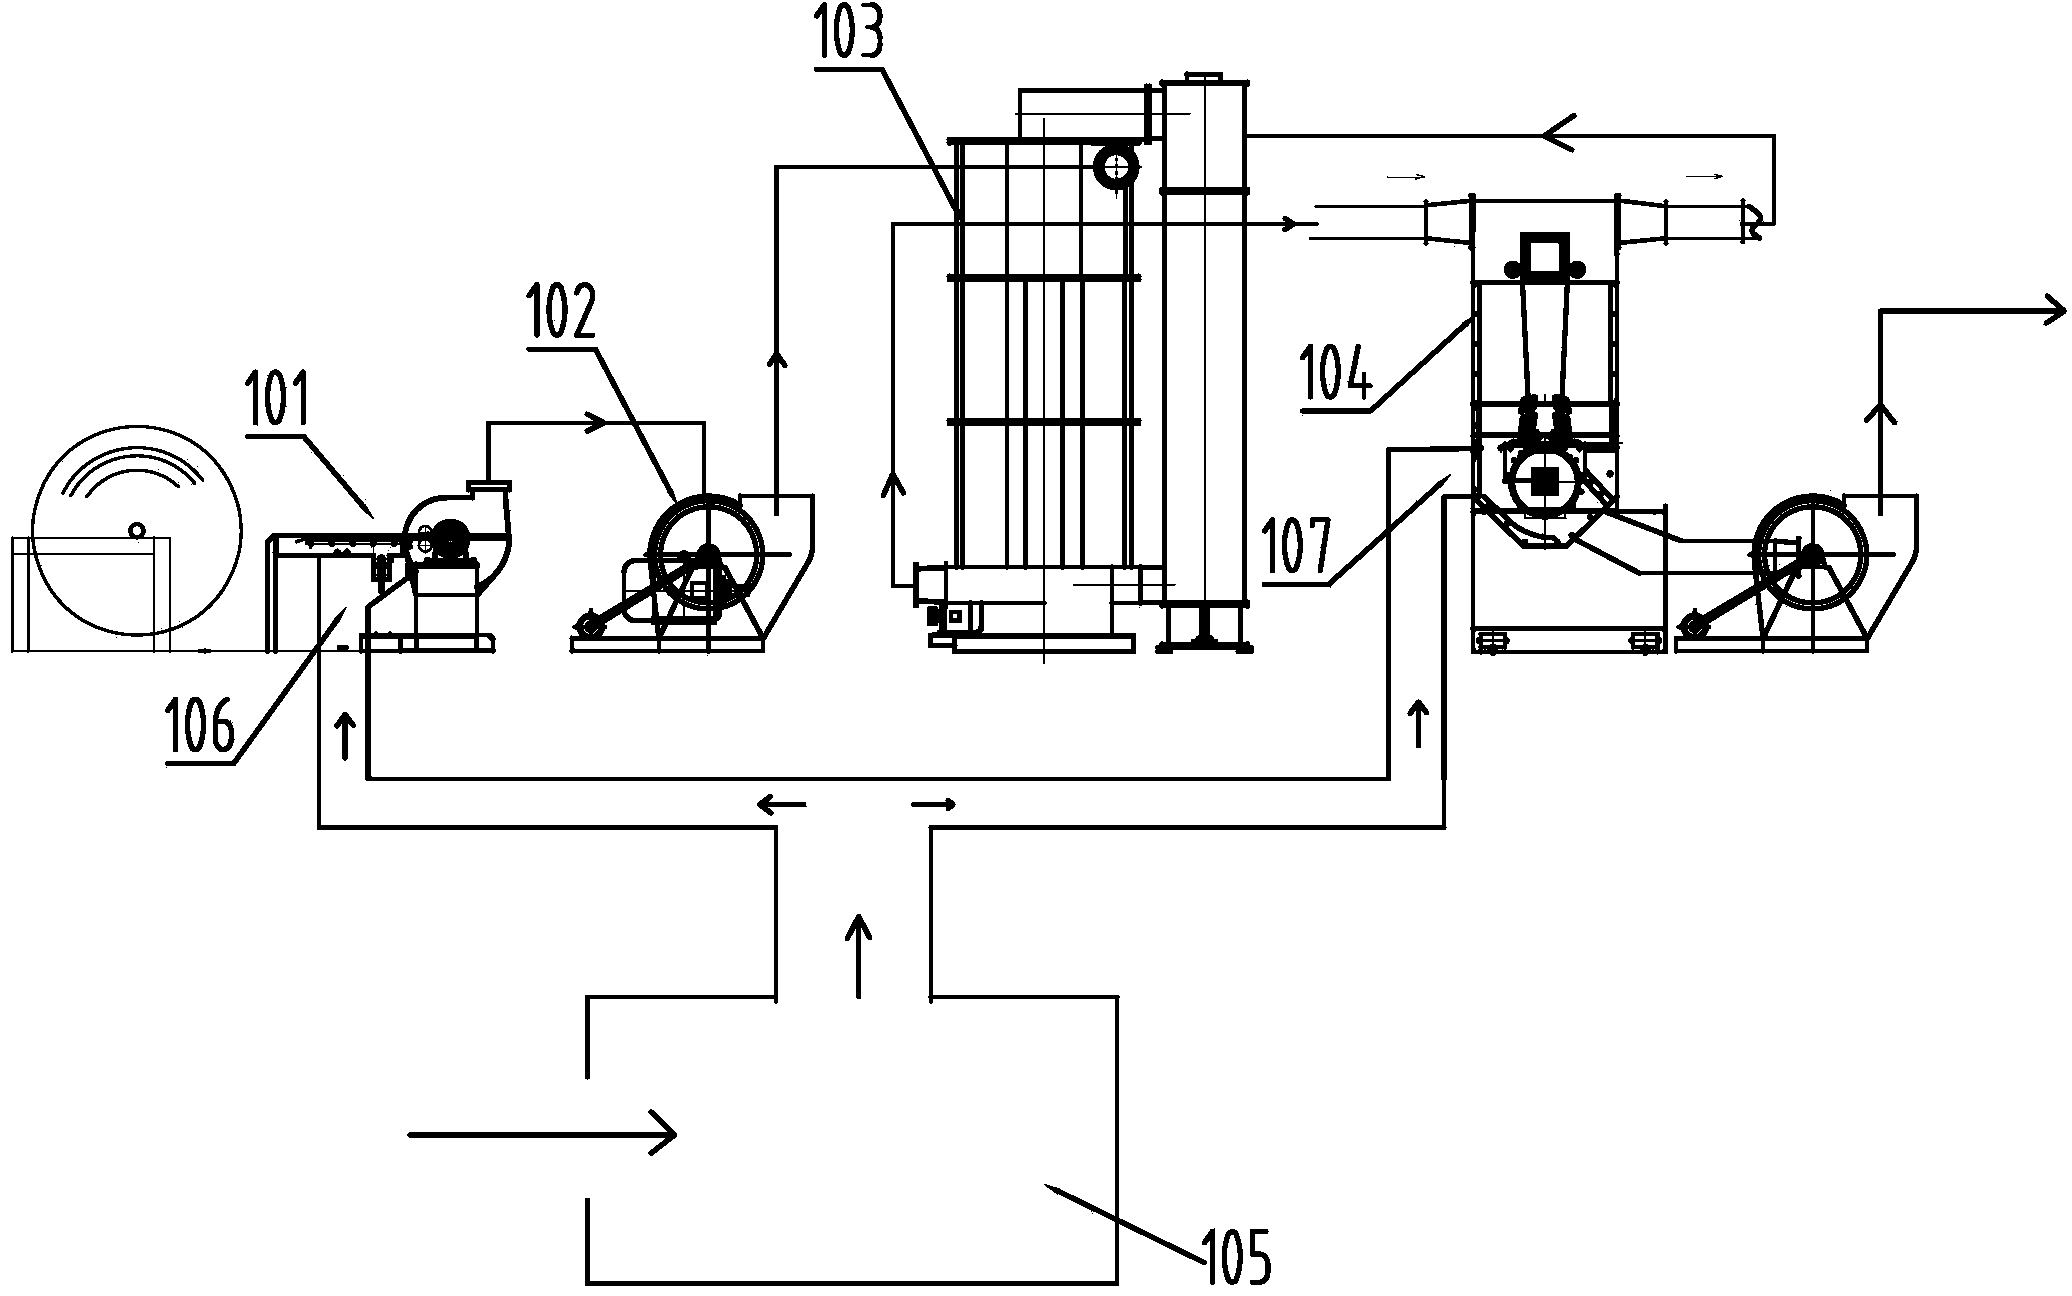 Equipment for producing reconstituted tobacco through dry-method paper making method